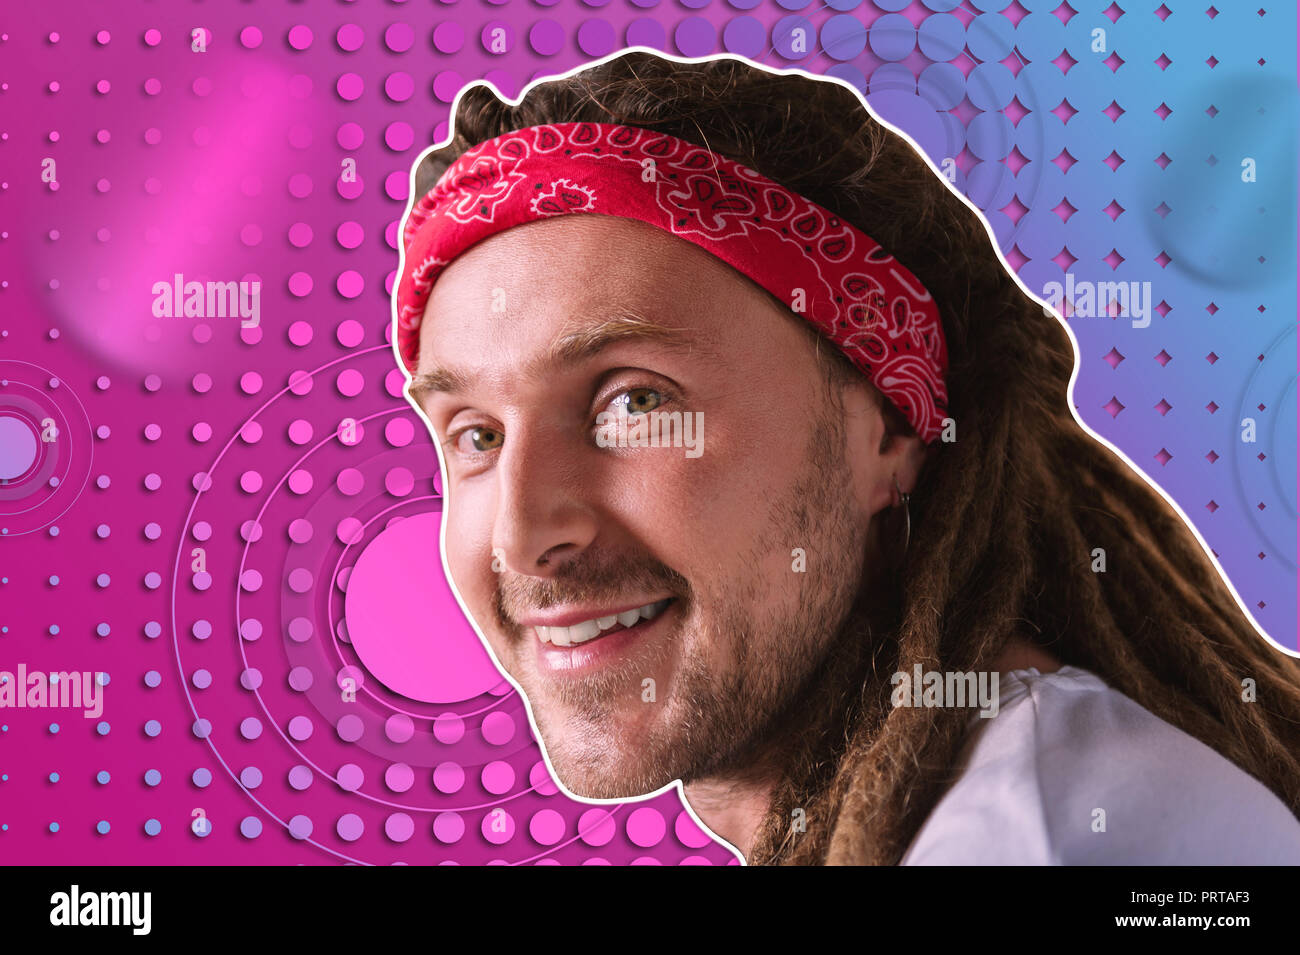 Unusual pleasant man with dreadlocks posing on the bright background Stock Photo